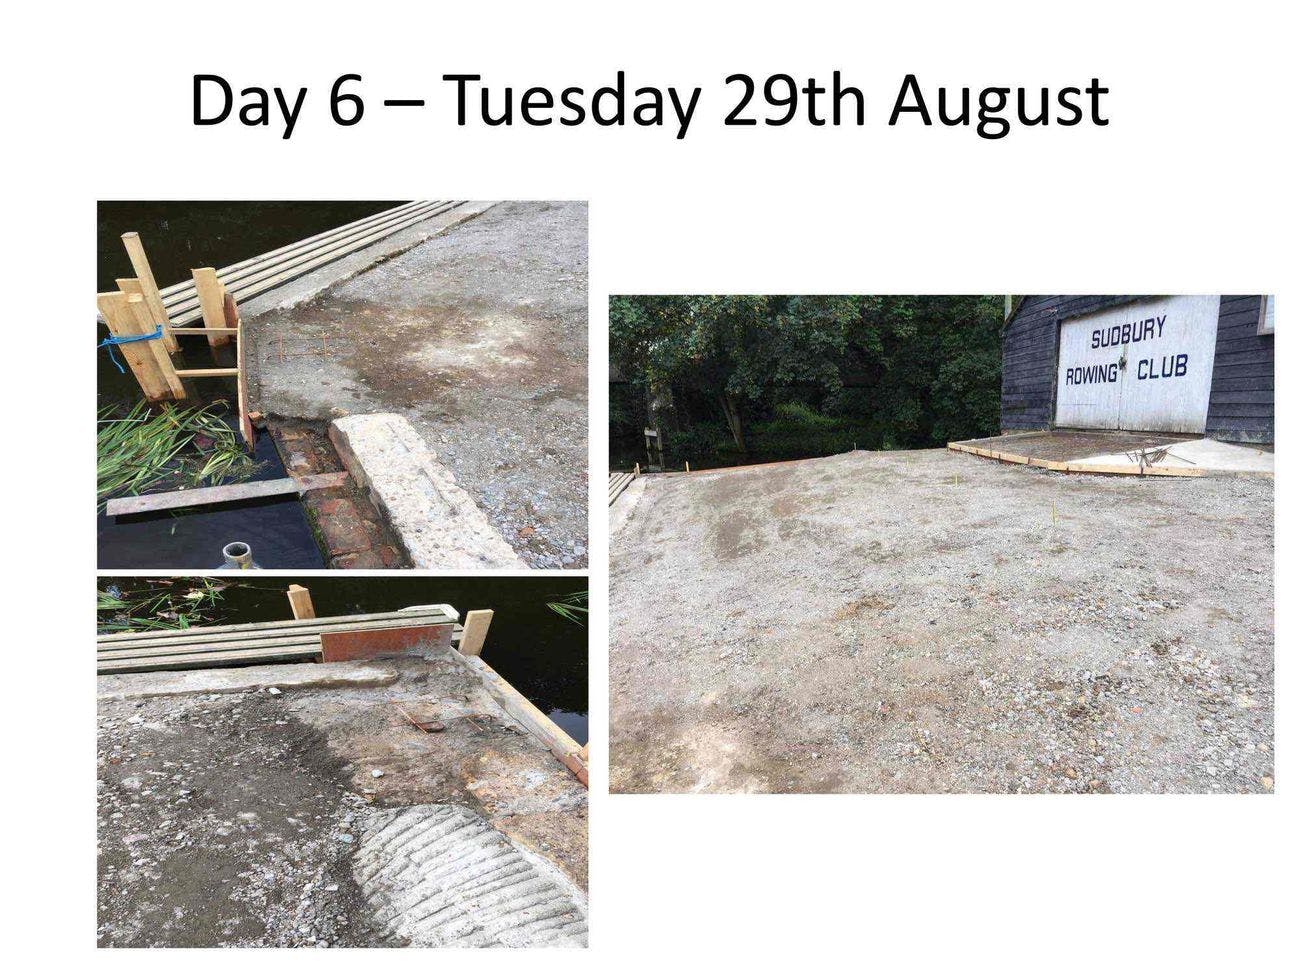 Day 6 – Tuesday 29th August